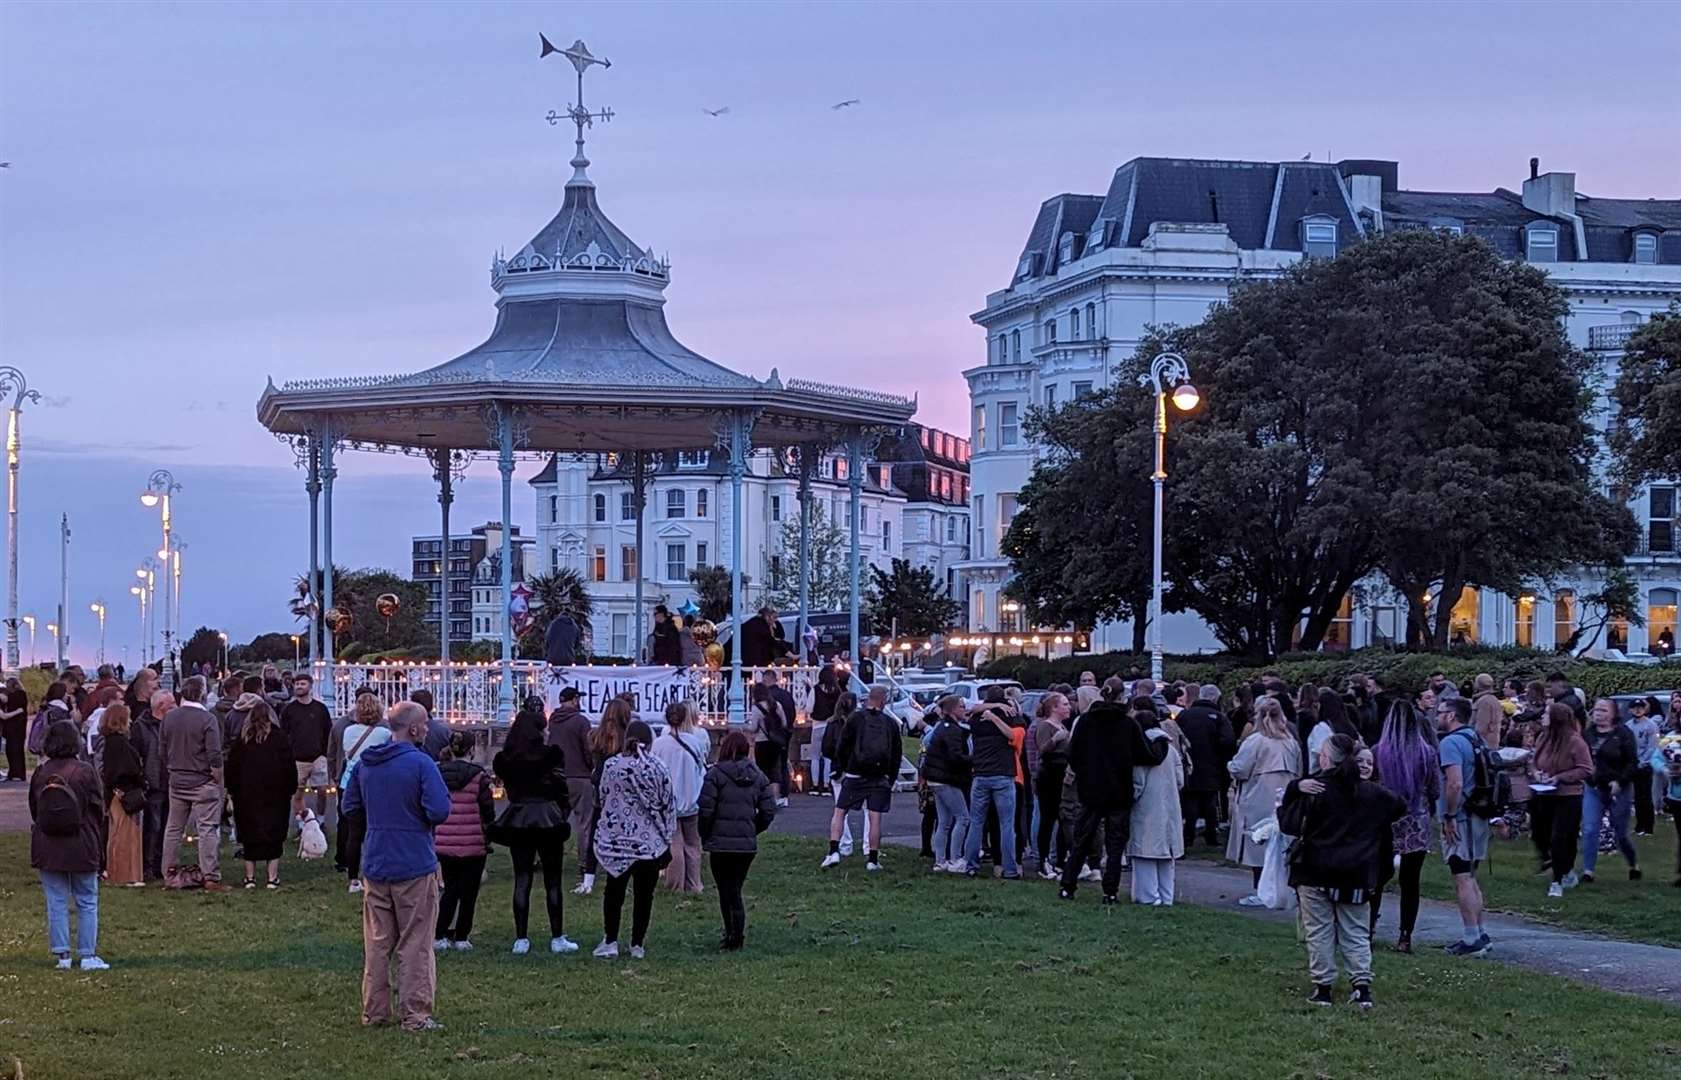 Leah Daley’s family said they were keen for the whole community to attend the event at The Leas bandstand in Folkestone. Picture: Rhys Griffiths